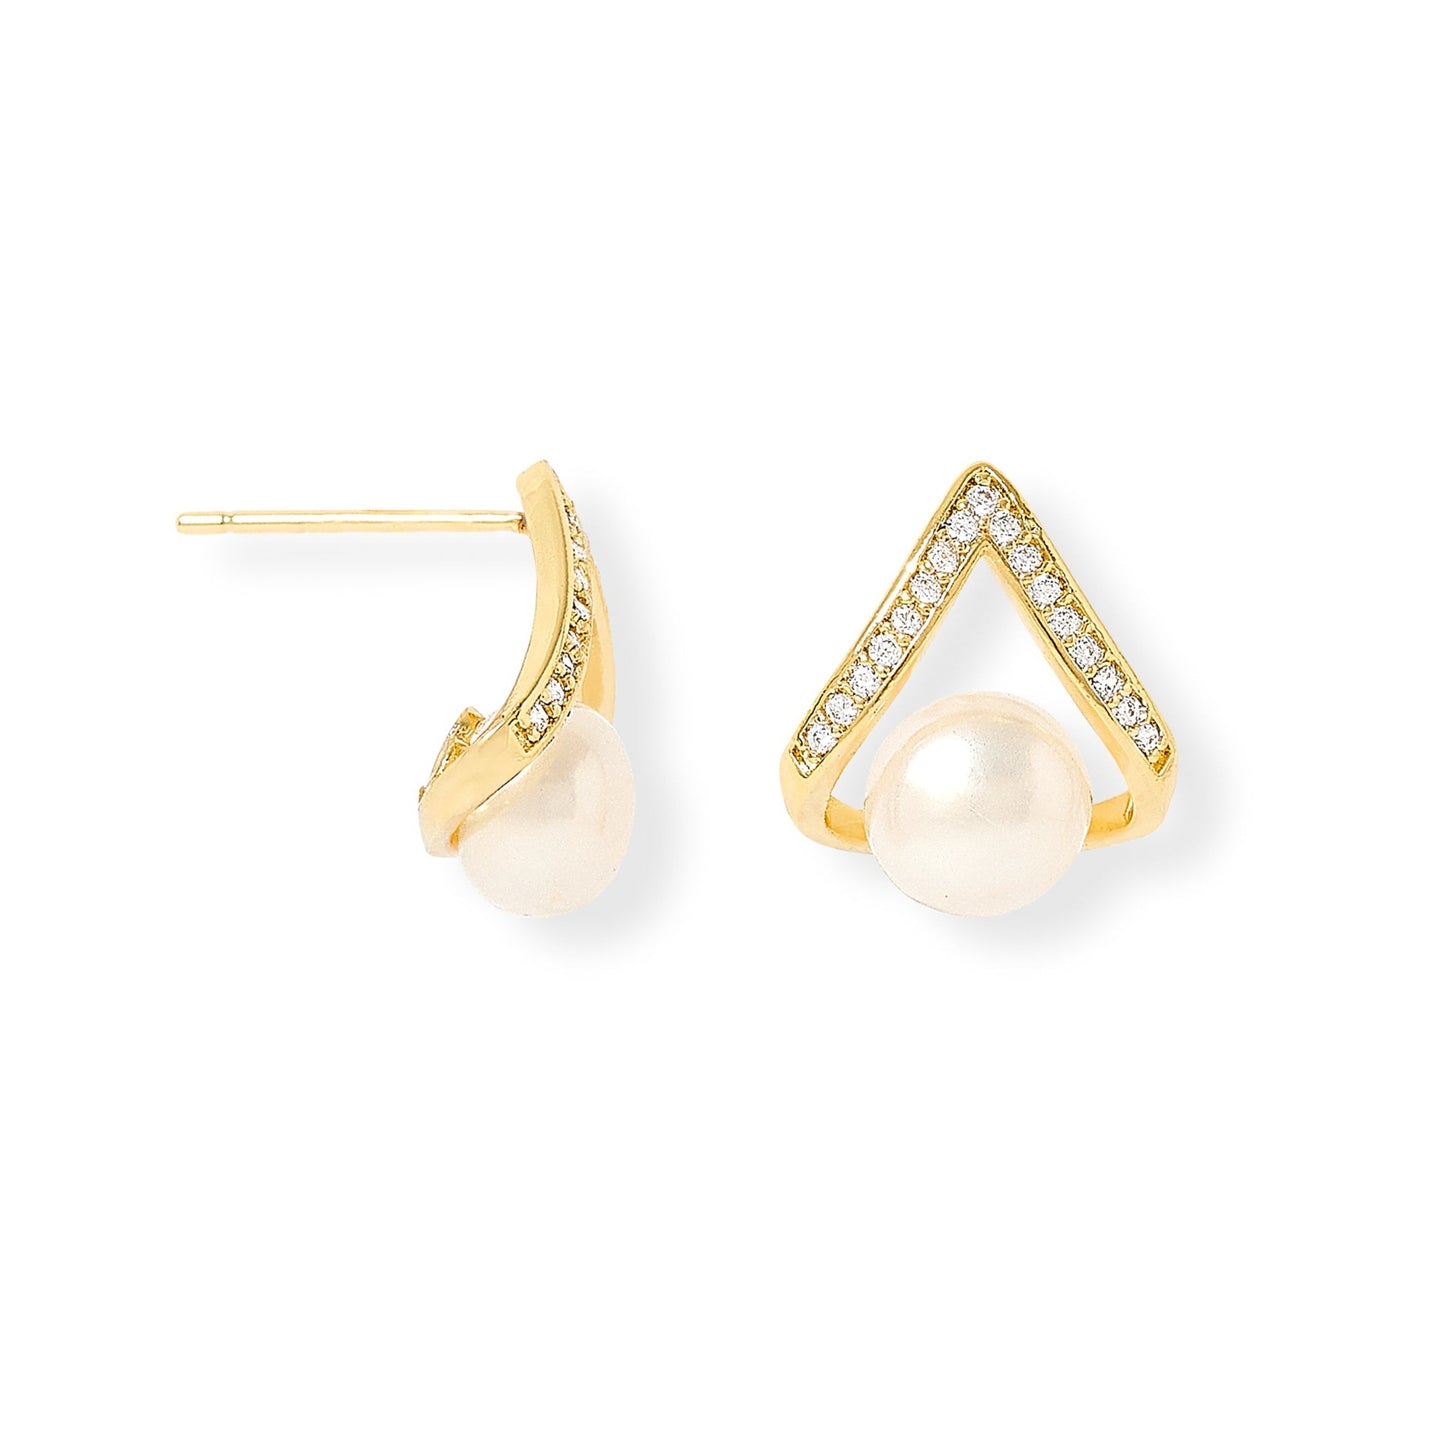 Stella gold pave triangular studs with cultured freshwater pearls